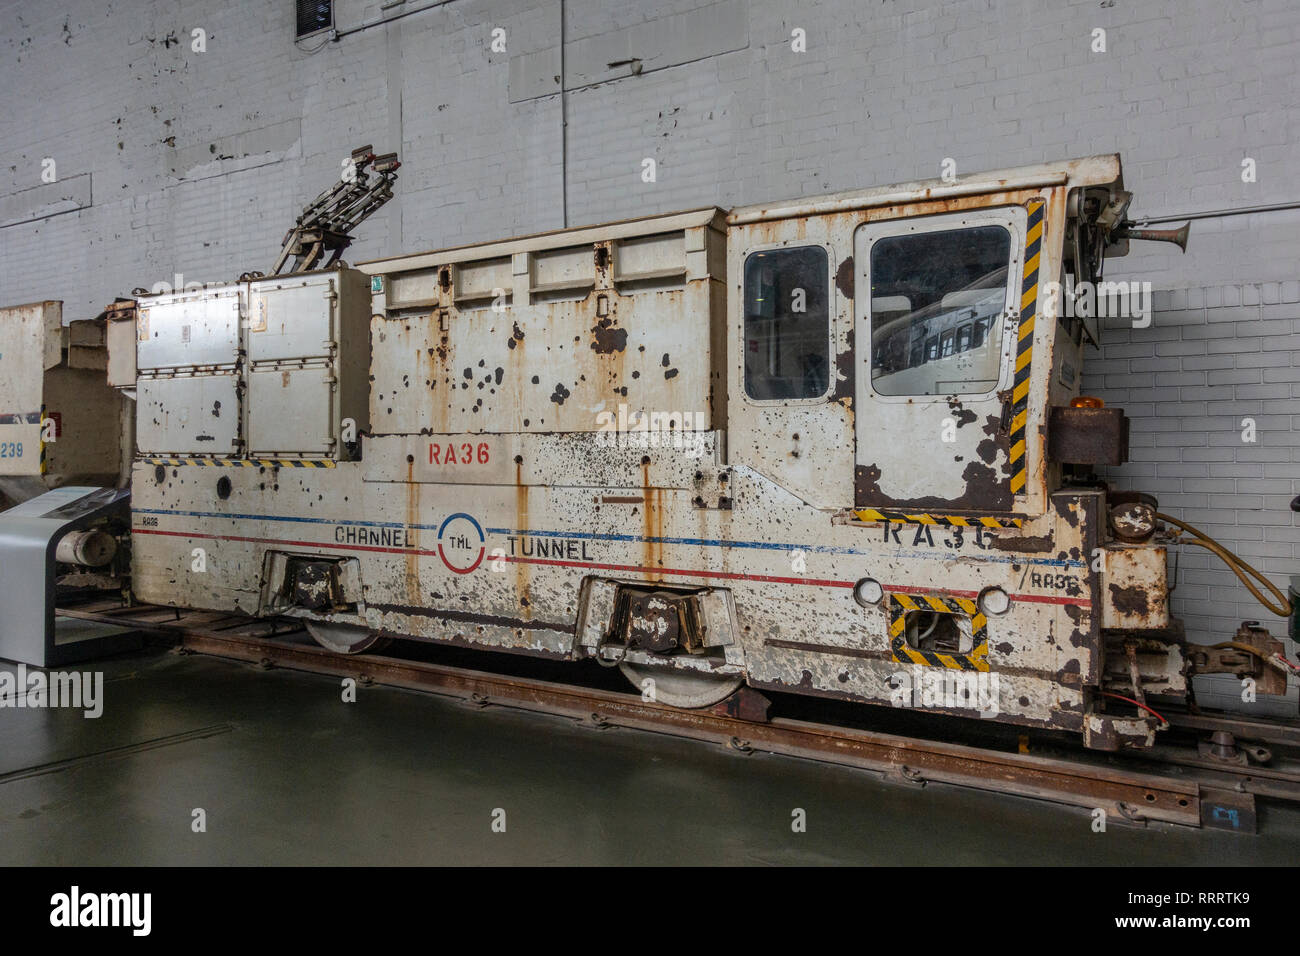 An electric locomotive used to construct the Channel Tunnel (Eurotunnel) on display in the National Railway Museum, York, UK. Stock Photo